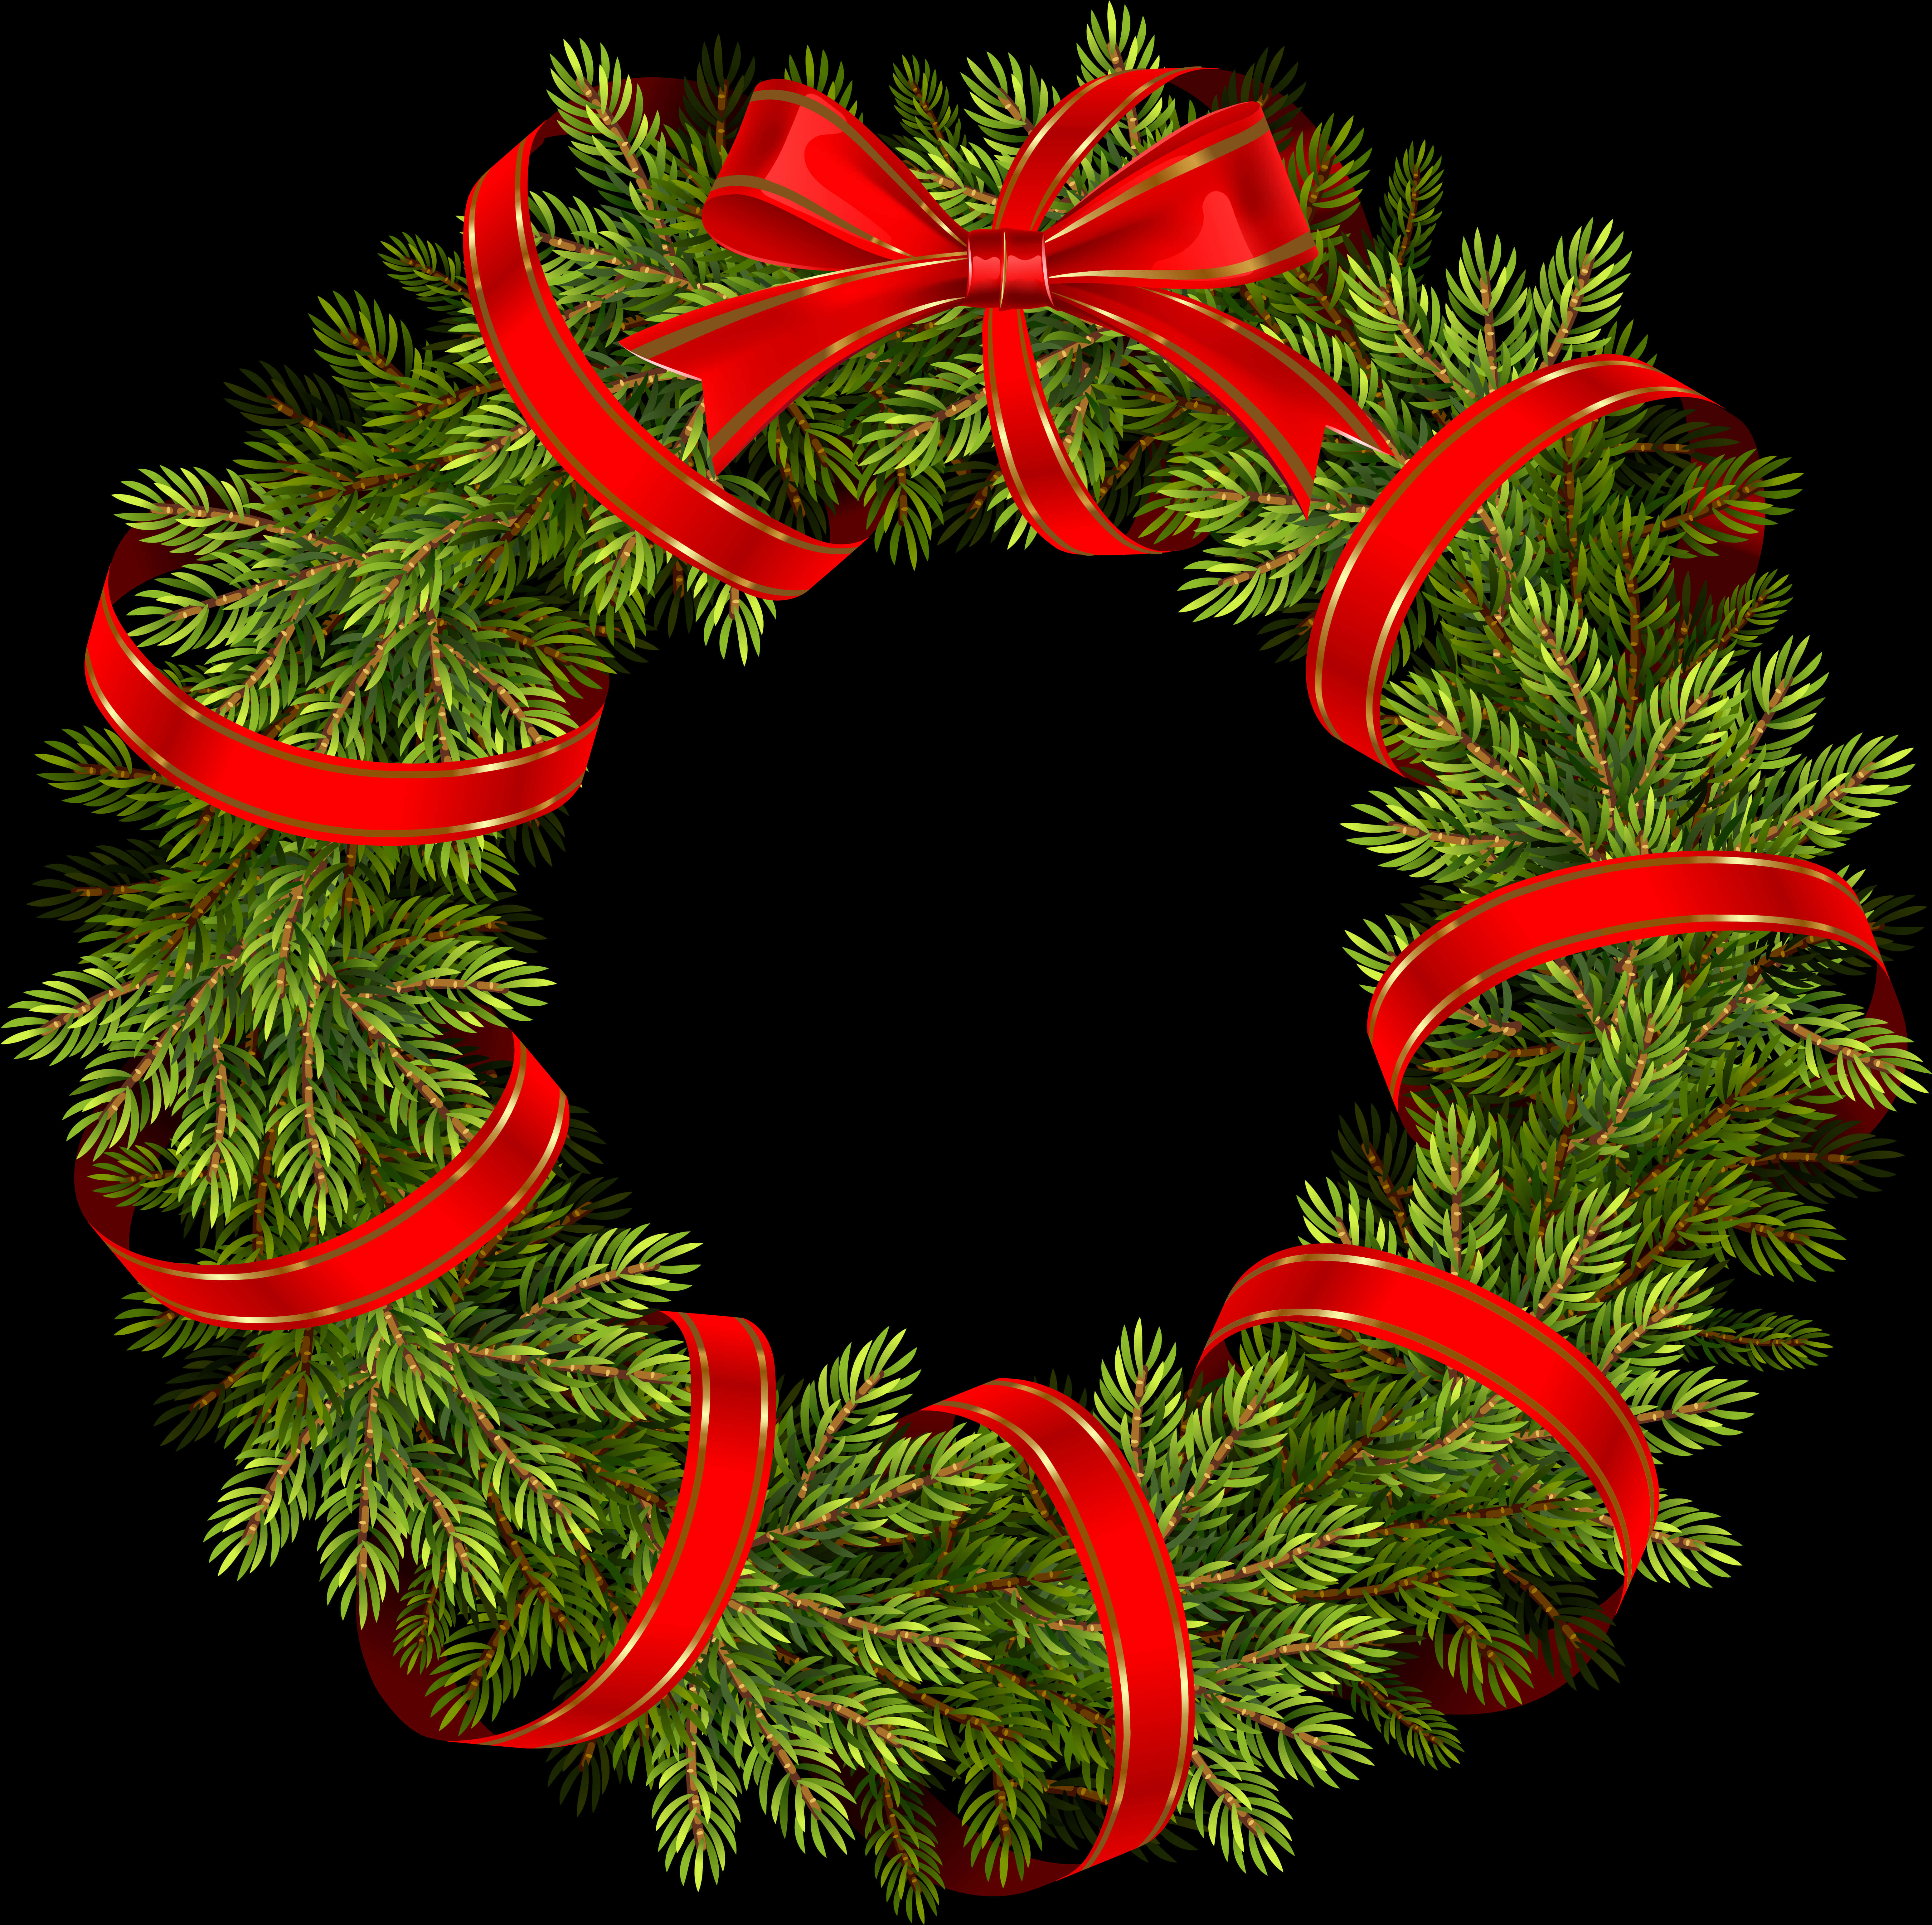 Christmas Wreath Wrapped With Red Ribbon